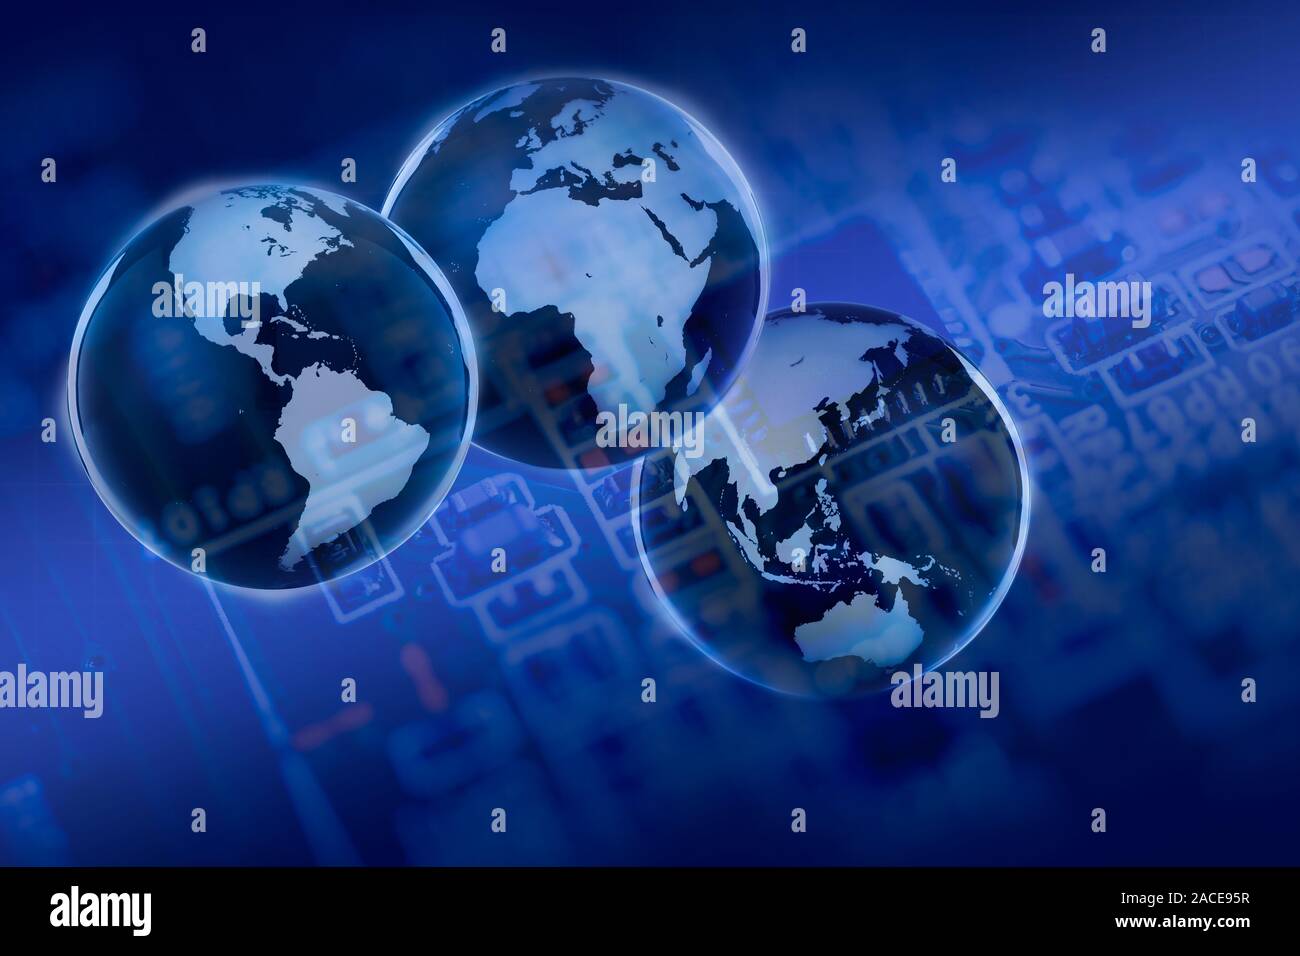 Digital composite of three globes over circuit board Stock Photo